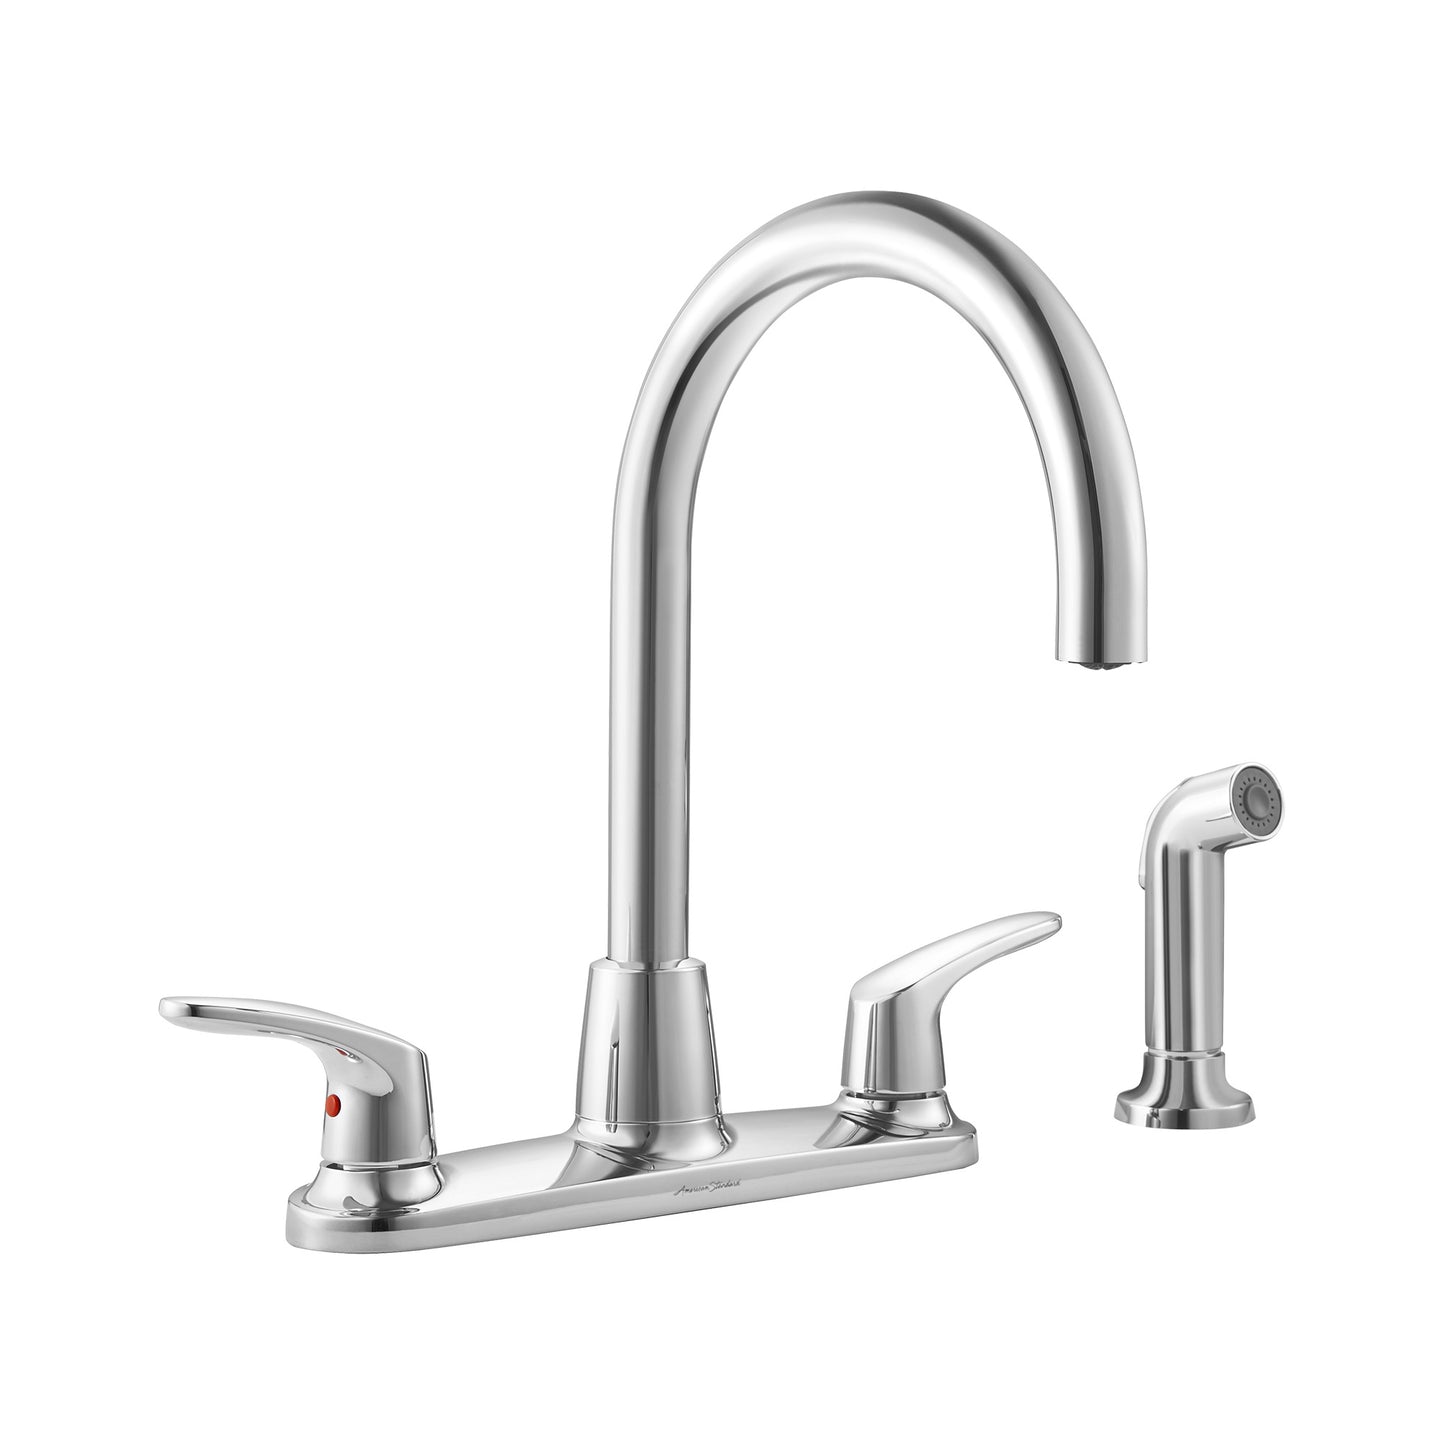 AMERICAN-STANDARD 7074551.002, Colony PRO 2-Handle Kitchen Faucet 1.5 gpm/5.7 L/min With Side Spray in Chrome